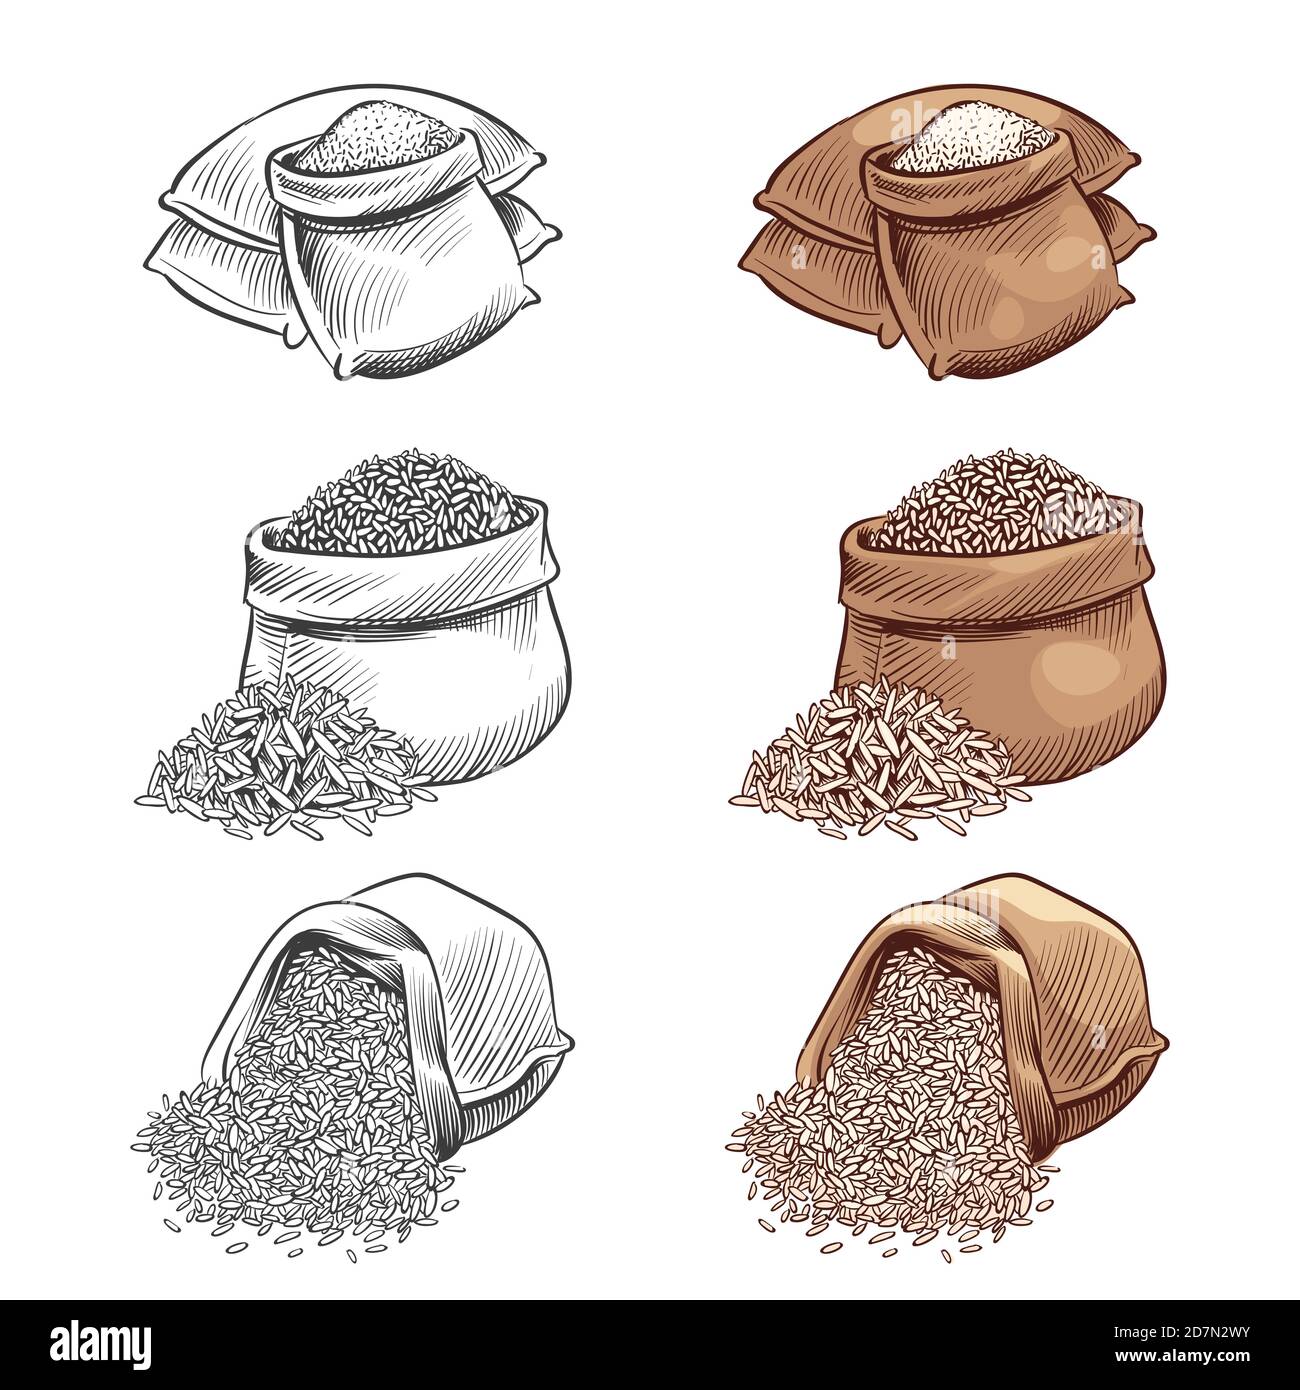 Hand drawn rice sacks vector set. Sketch rice isolated on white background. Rice in sack, grain cereal sketch illustration Stock Vector